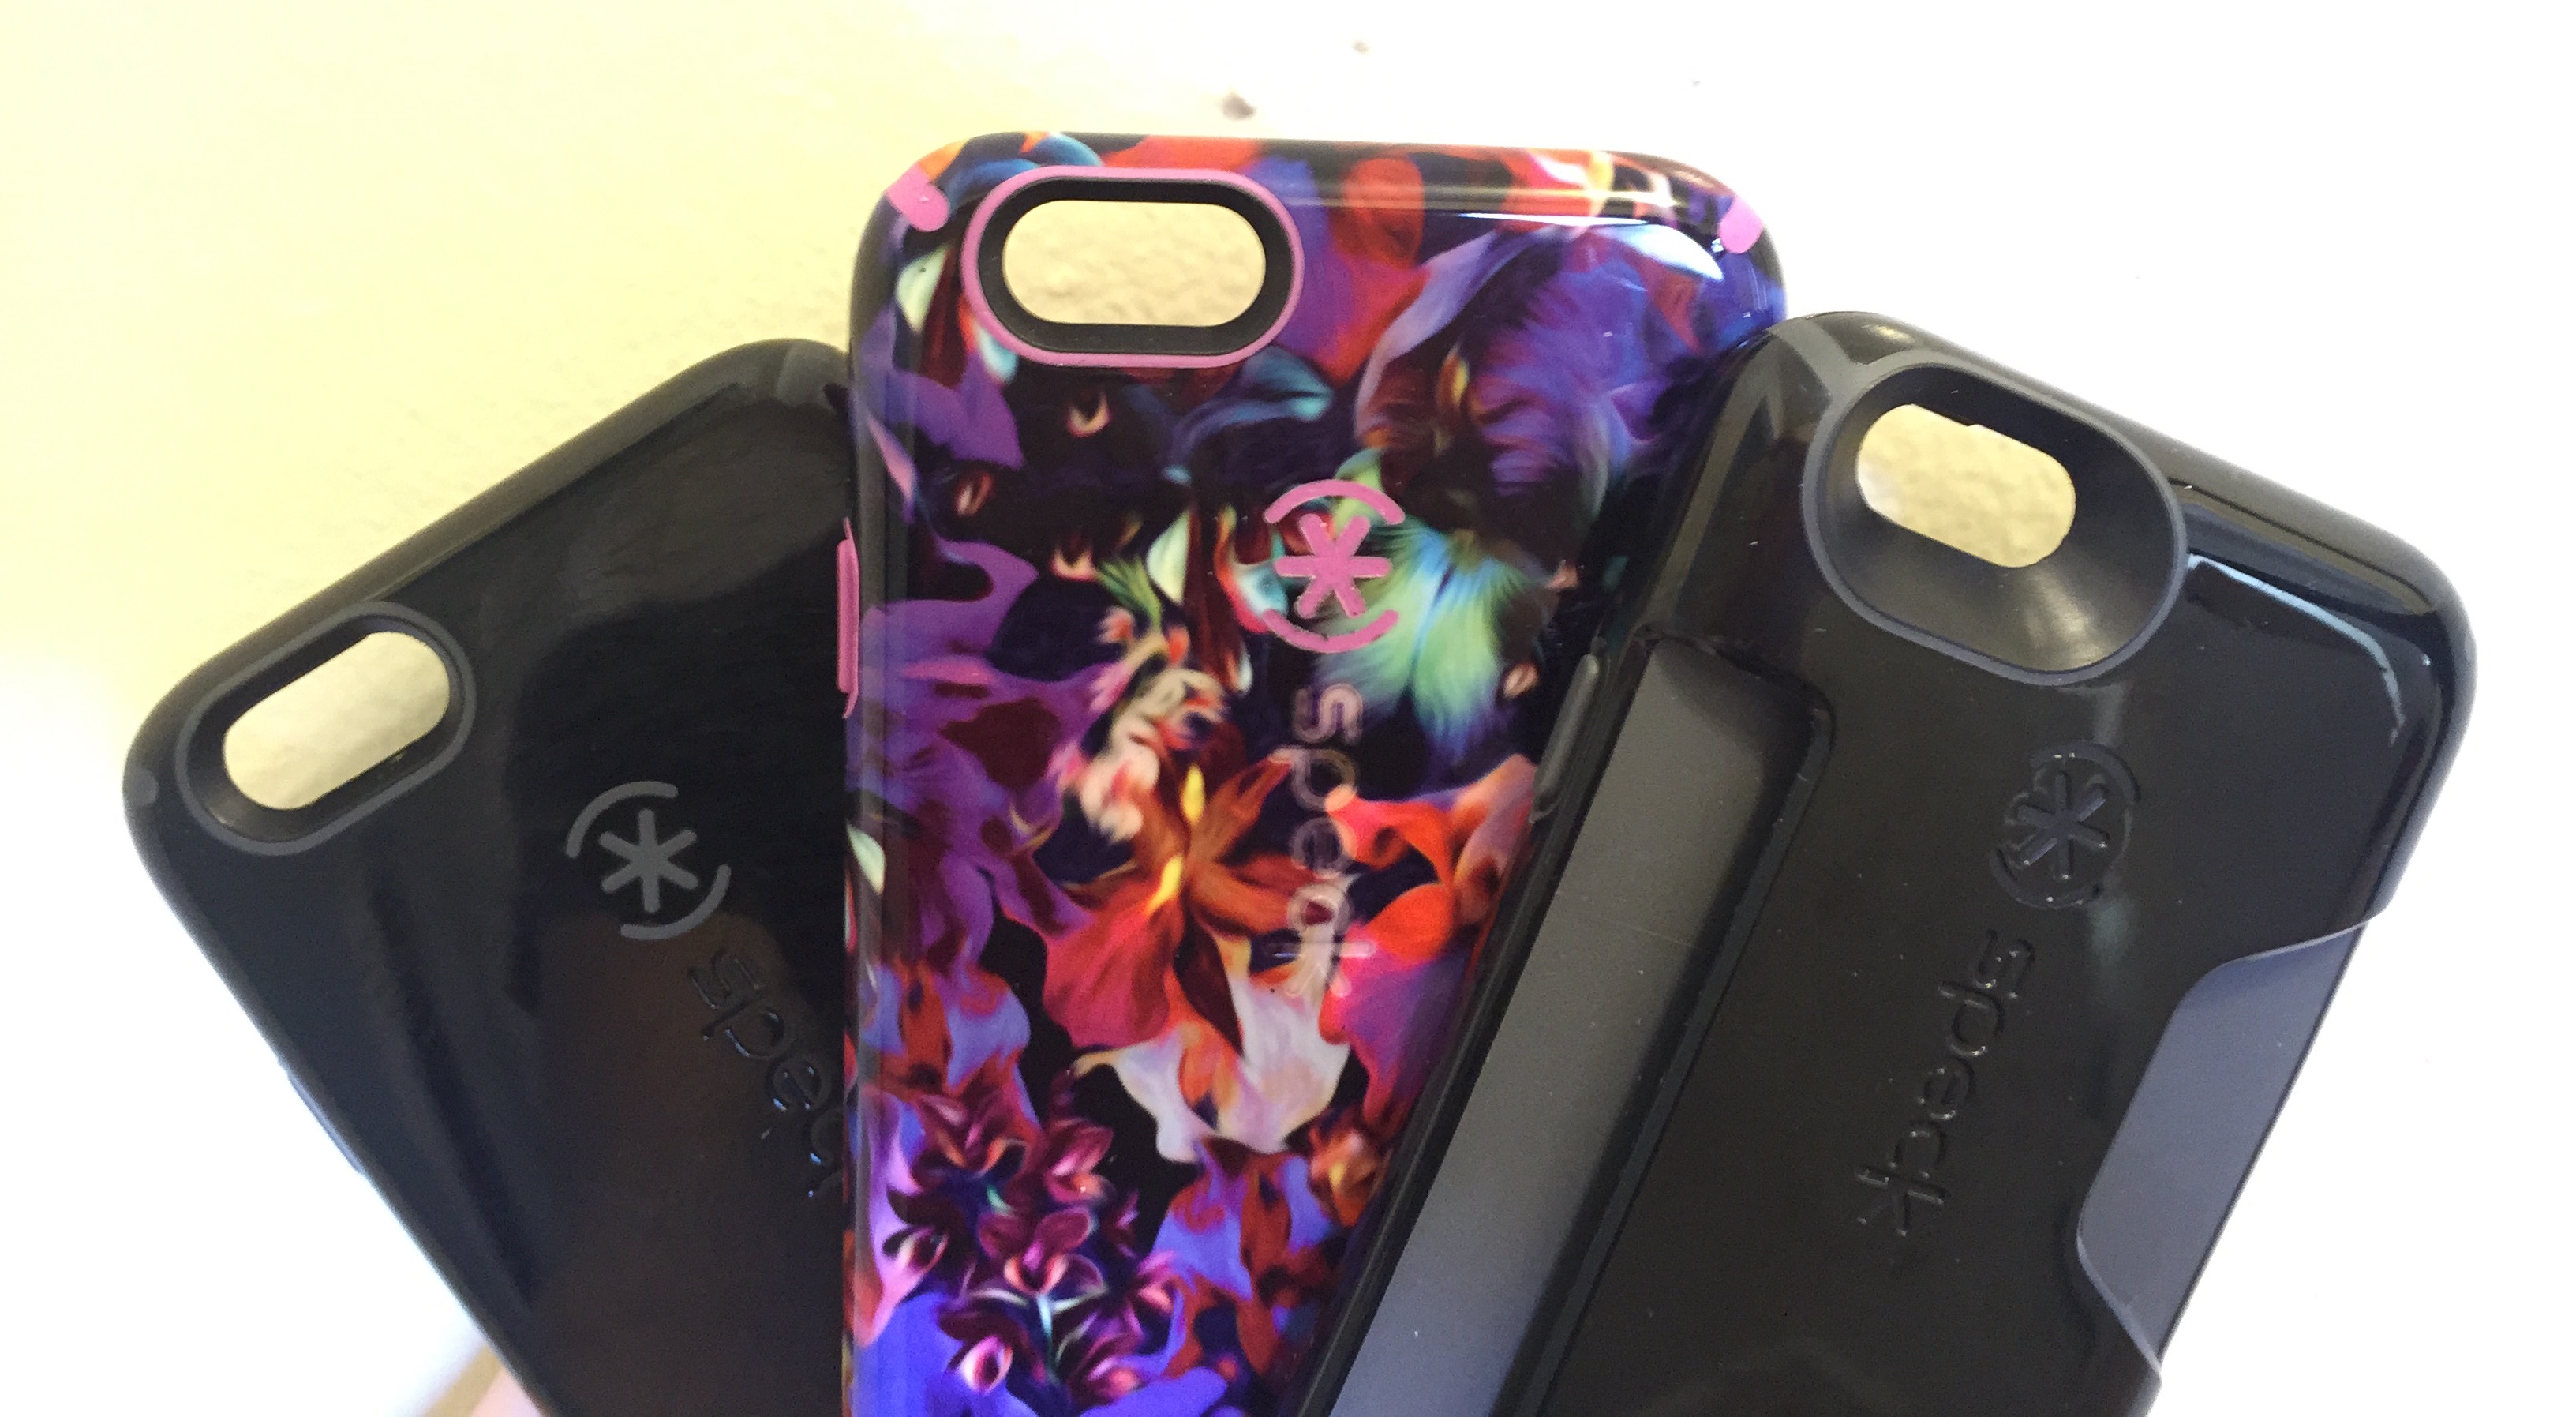 Speck iPhone 6 case roundup: CandyShell, Inked, and Card cases reviewed